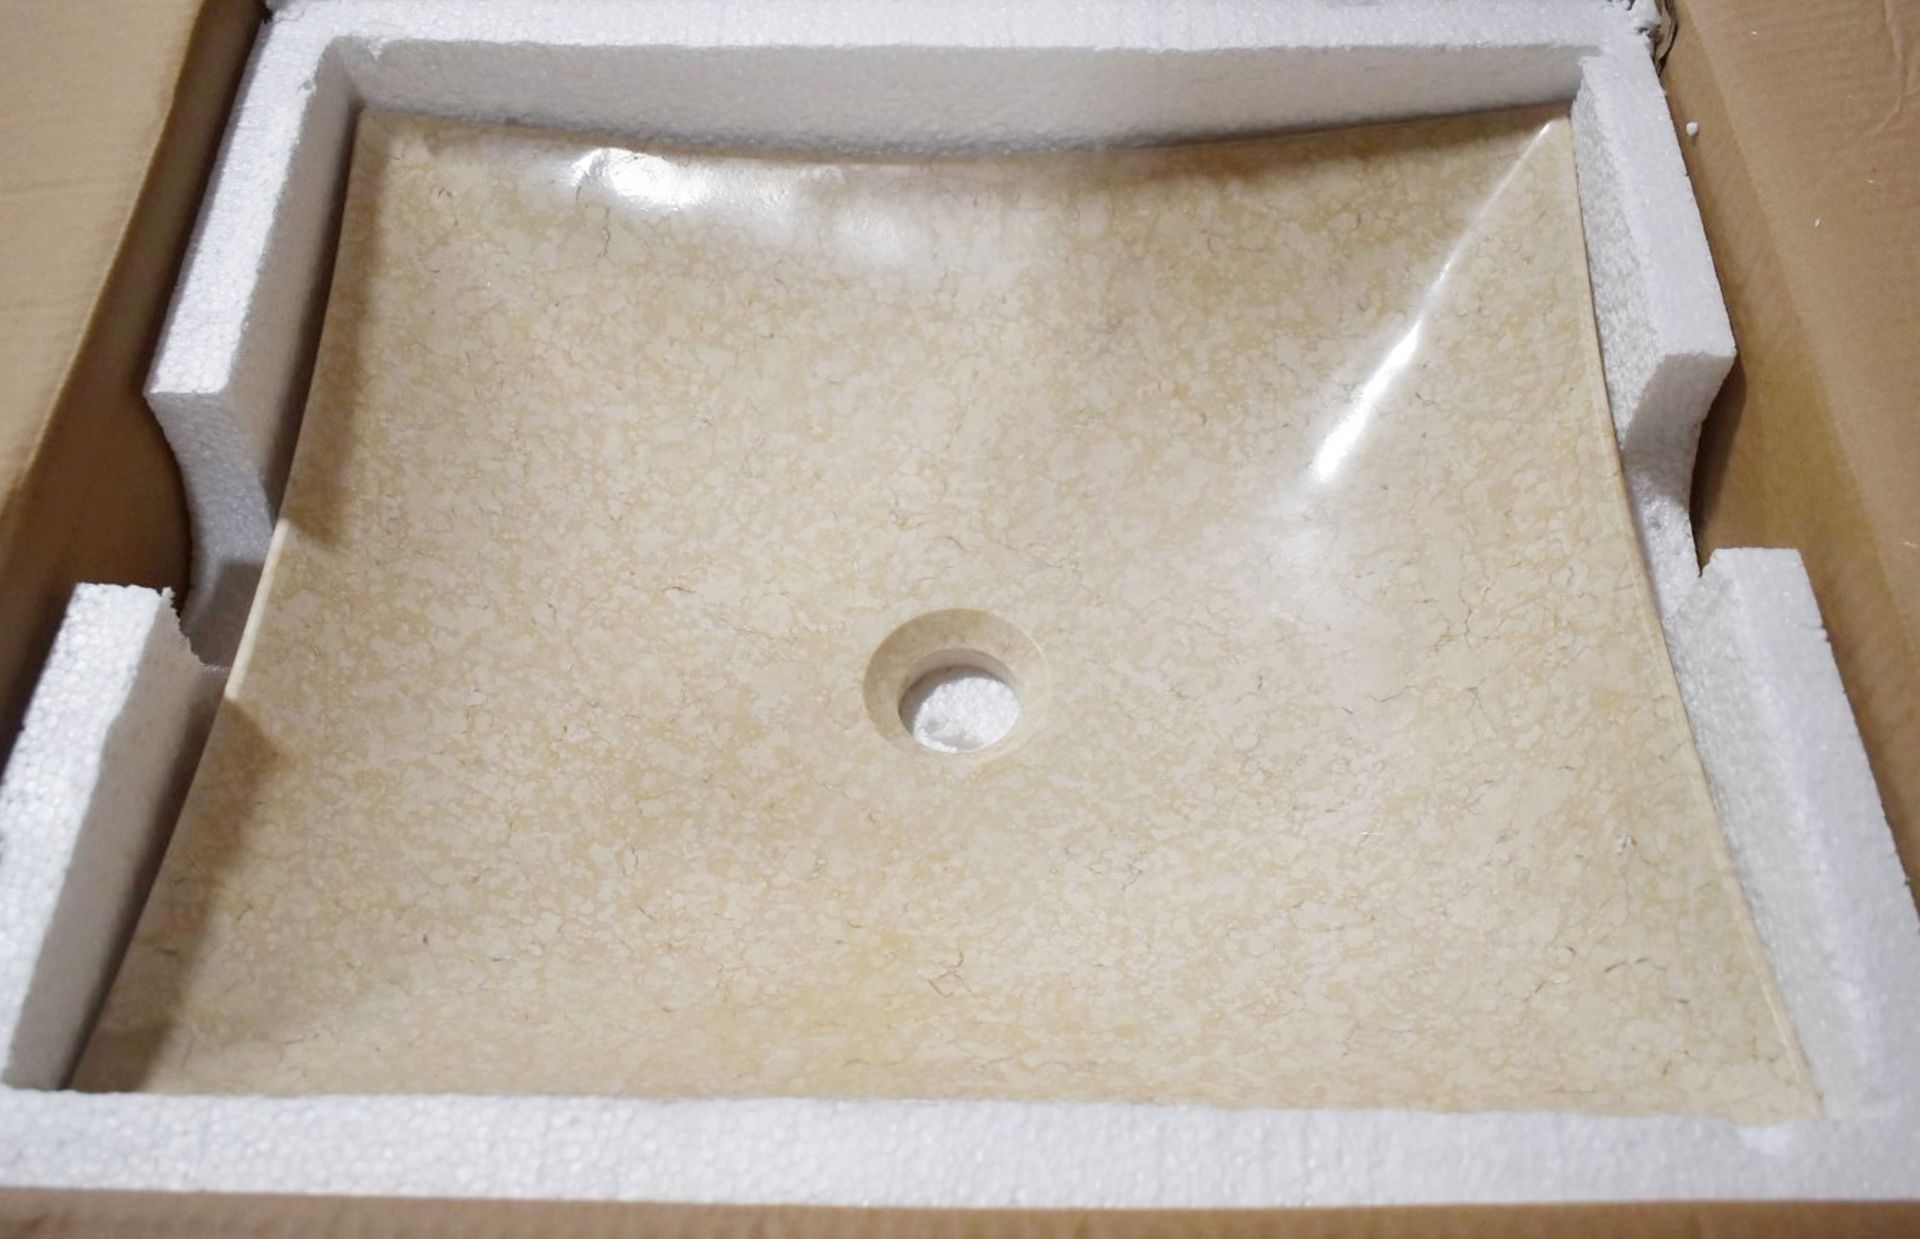 1 x Stonearth 'Aston' Solid Galala Marble Stone Countertop Sink Basin - New Boxed Stock - RRP £495 - Image 3 of 7